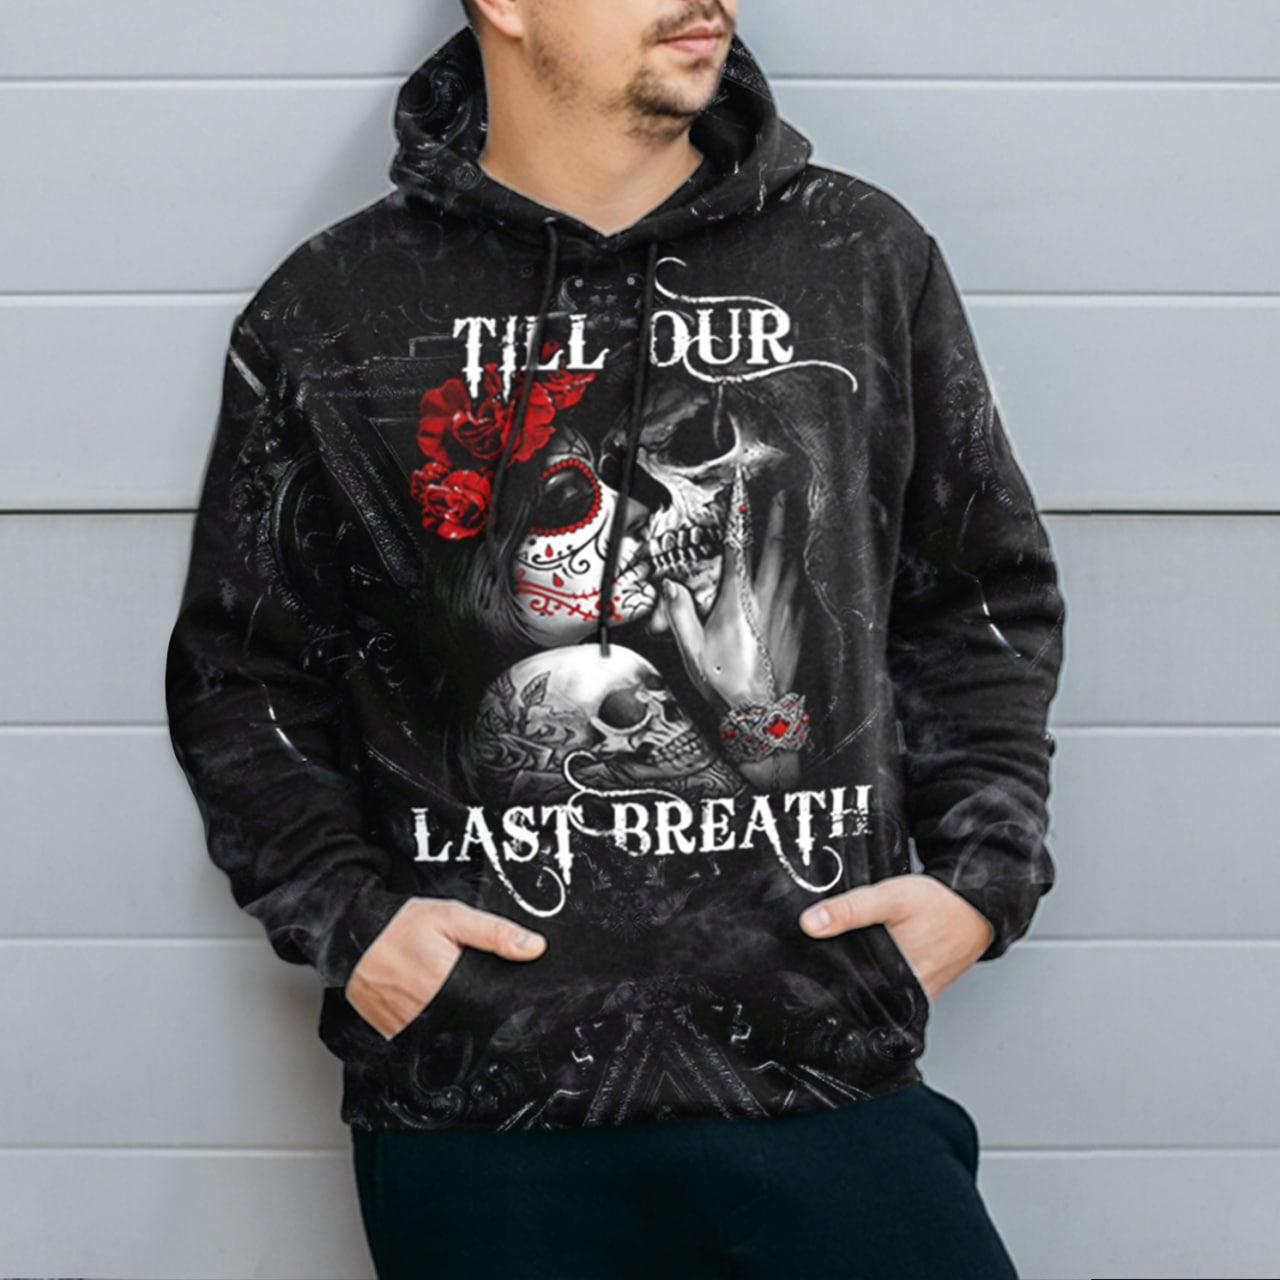 From Our First Kiss - Till Our Last Breath Funny Skull Combo Hoodie For Couple - Wonder Skull